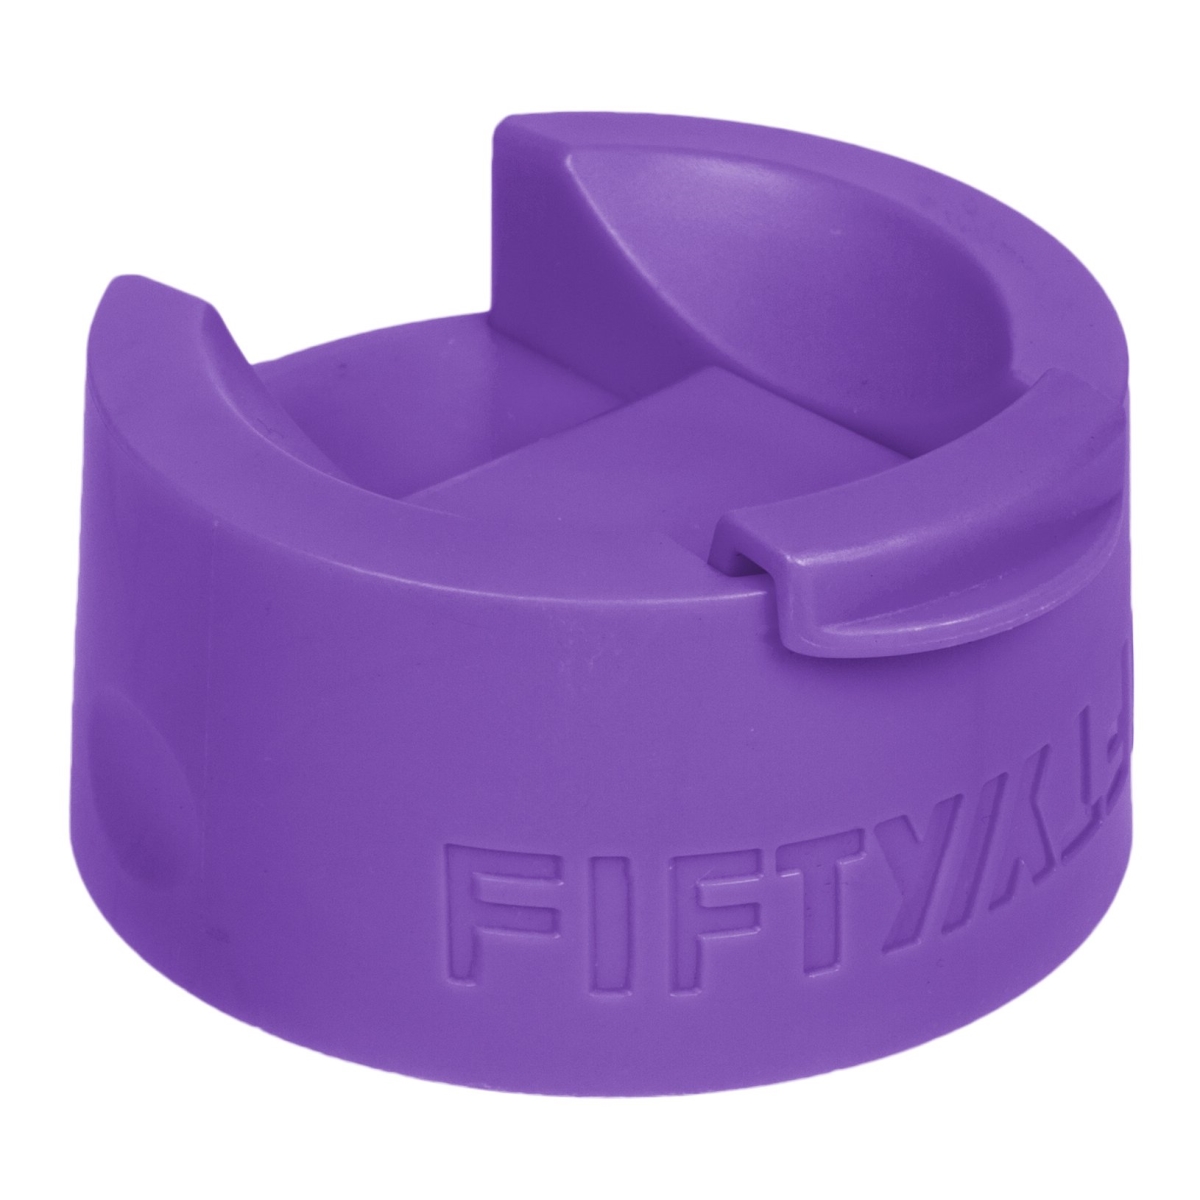 A68003pu0 Fifty & Fifty Wide-mouth Coffee Flip-top Cap, Royal Purple